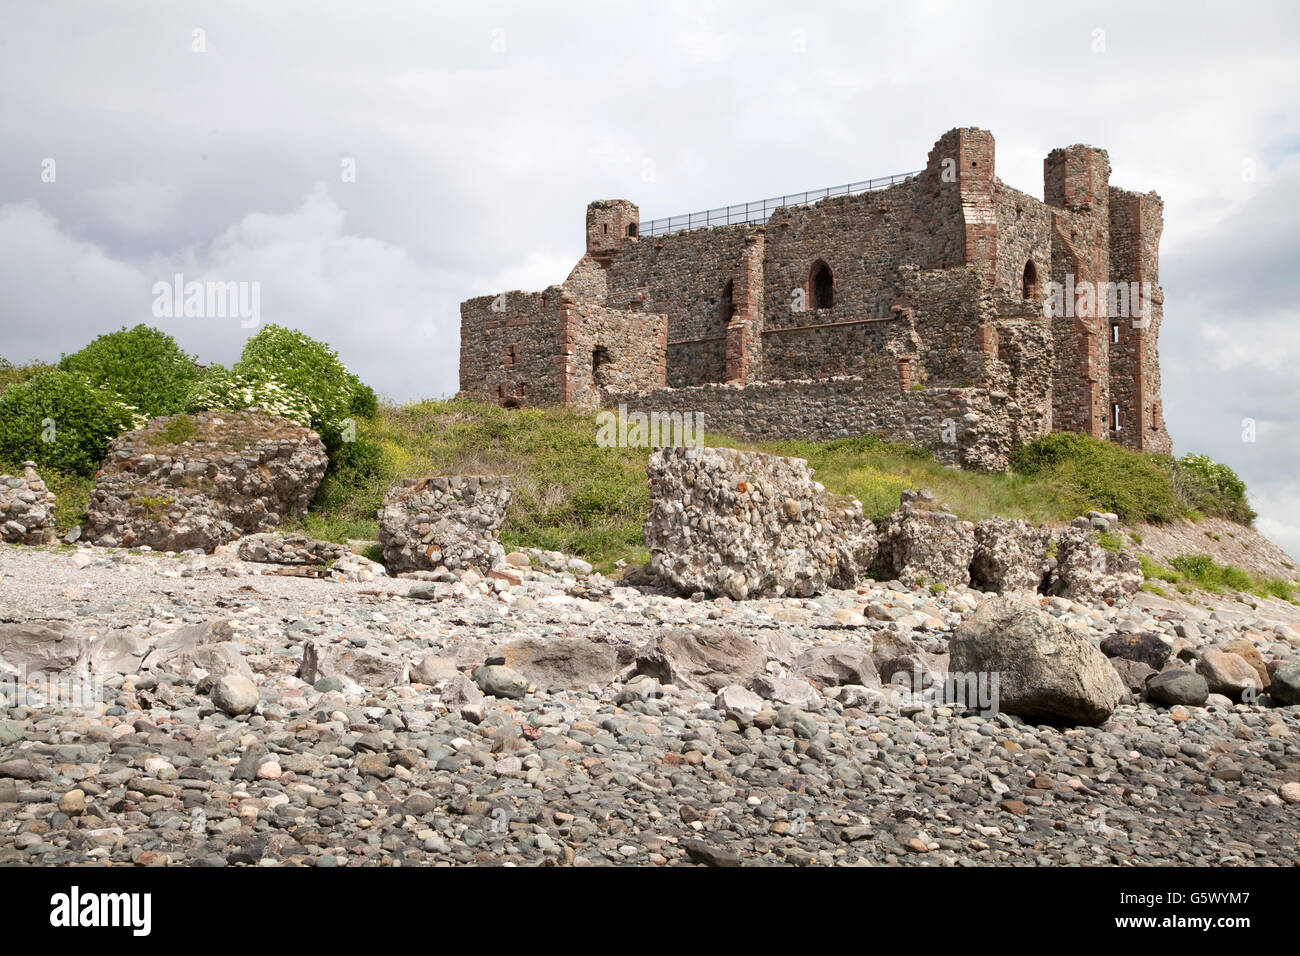 The ruins of Piel Castle standing on the stony shores of Piel Island off the Furness Peninsula in Cumbria, England. Stock Photo